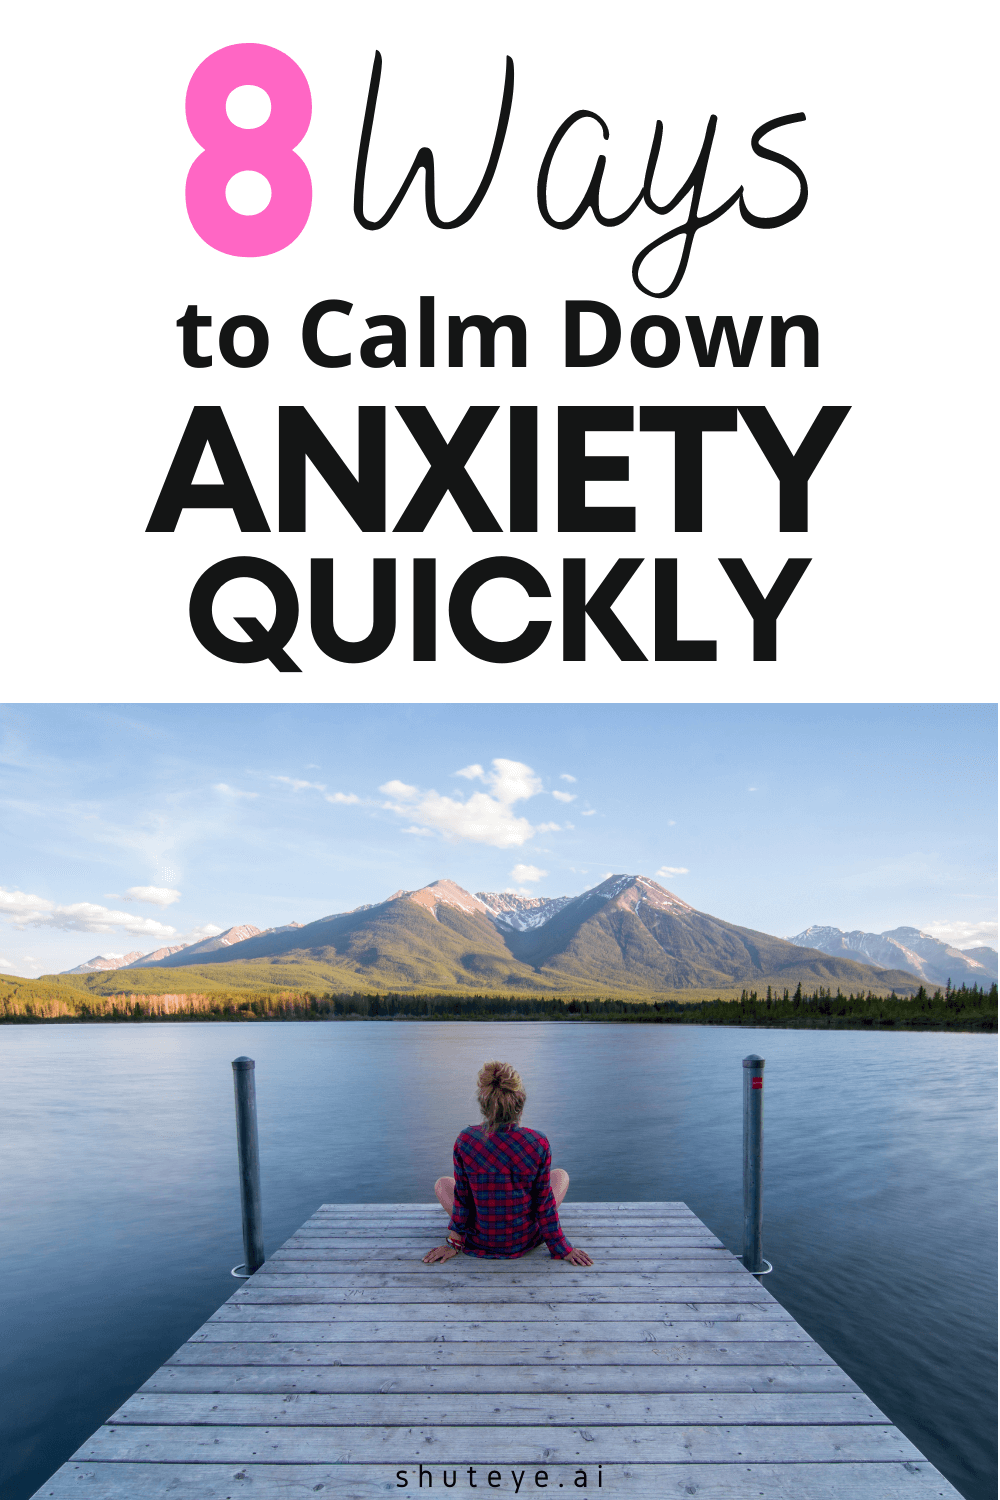 How to Calm Down Anxiety Quickly? 8 Ways Here!